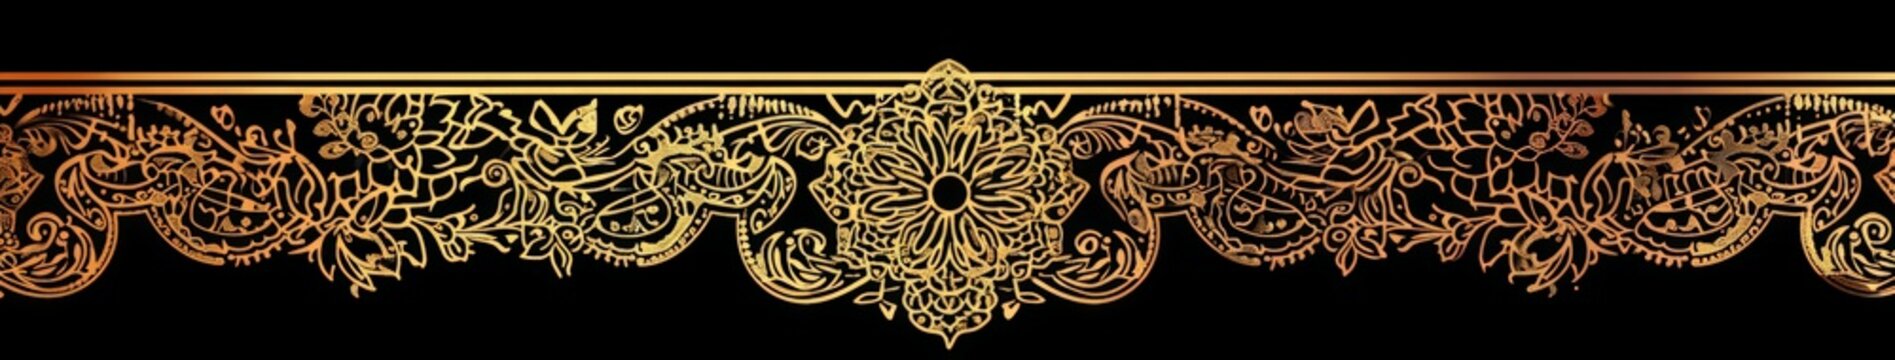 Black Background With Gold Pattern